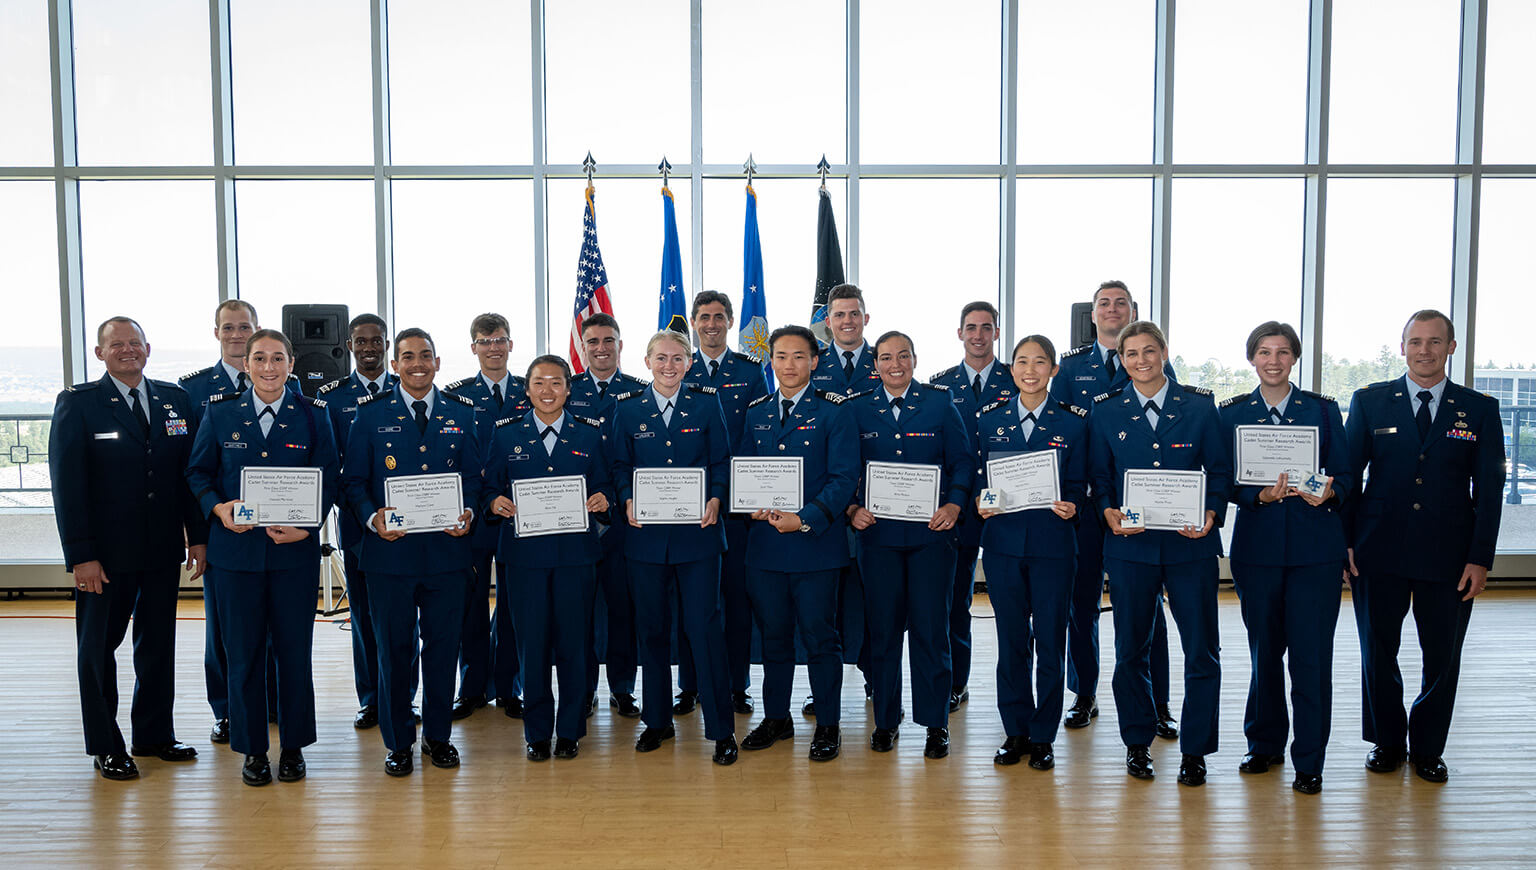 Cadets with summer research awards